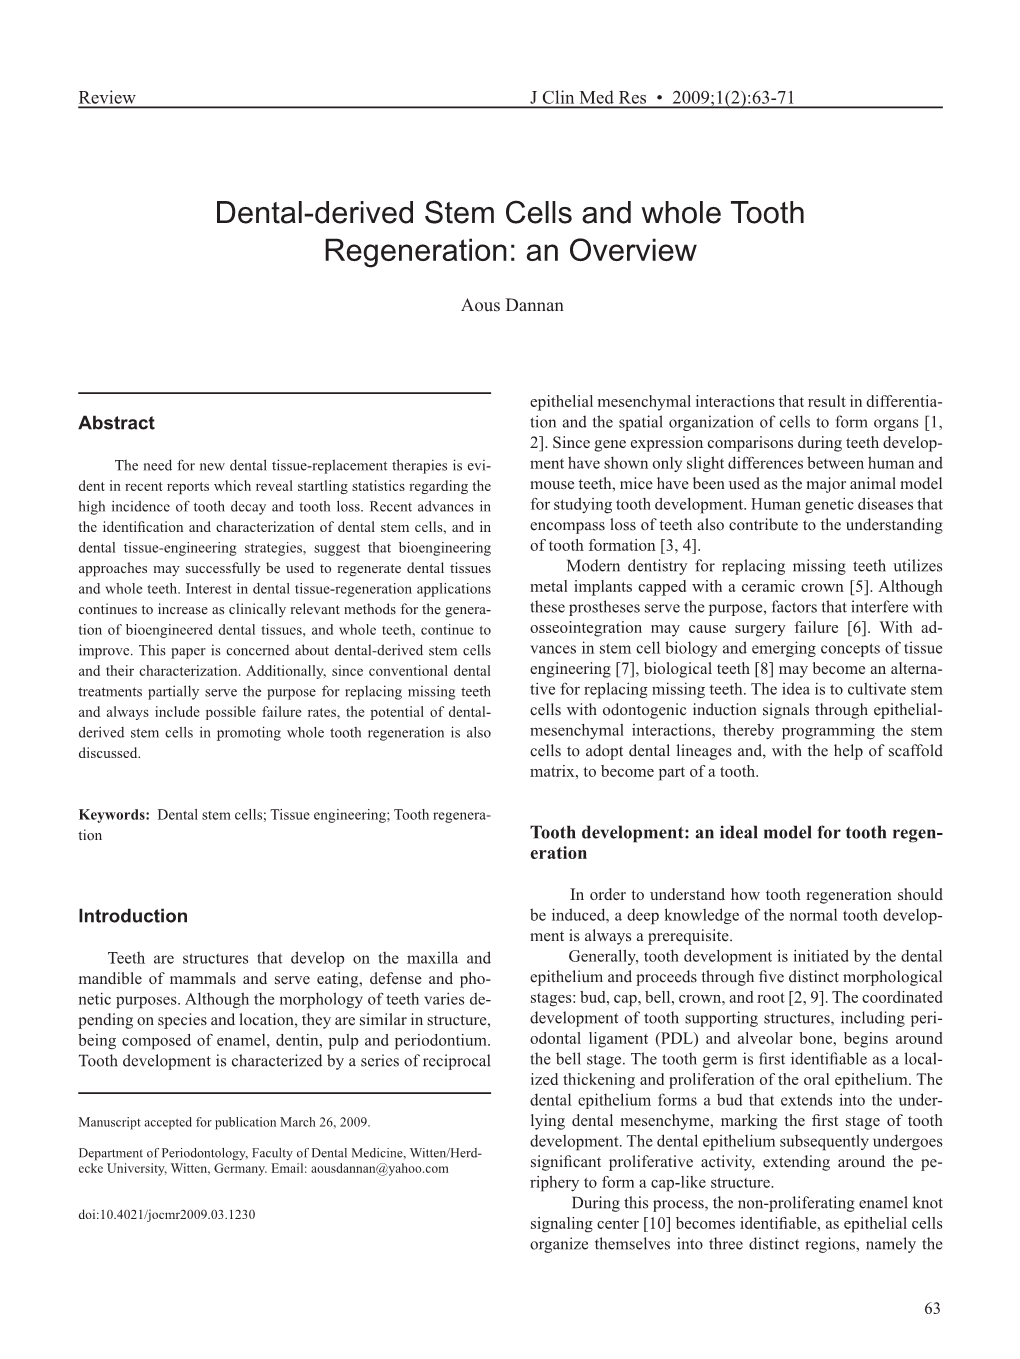 Dental-Derived Stem Cells and Whole Tooth Regeneration: an Overview